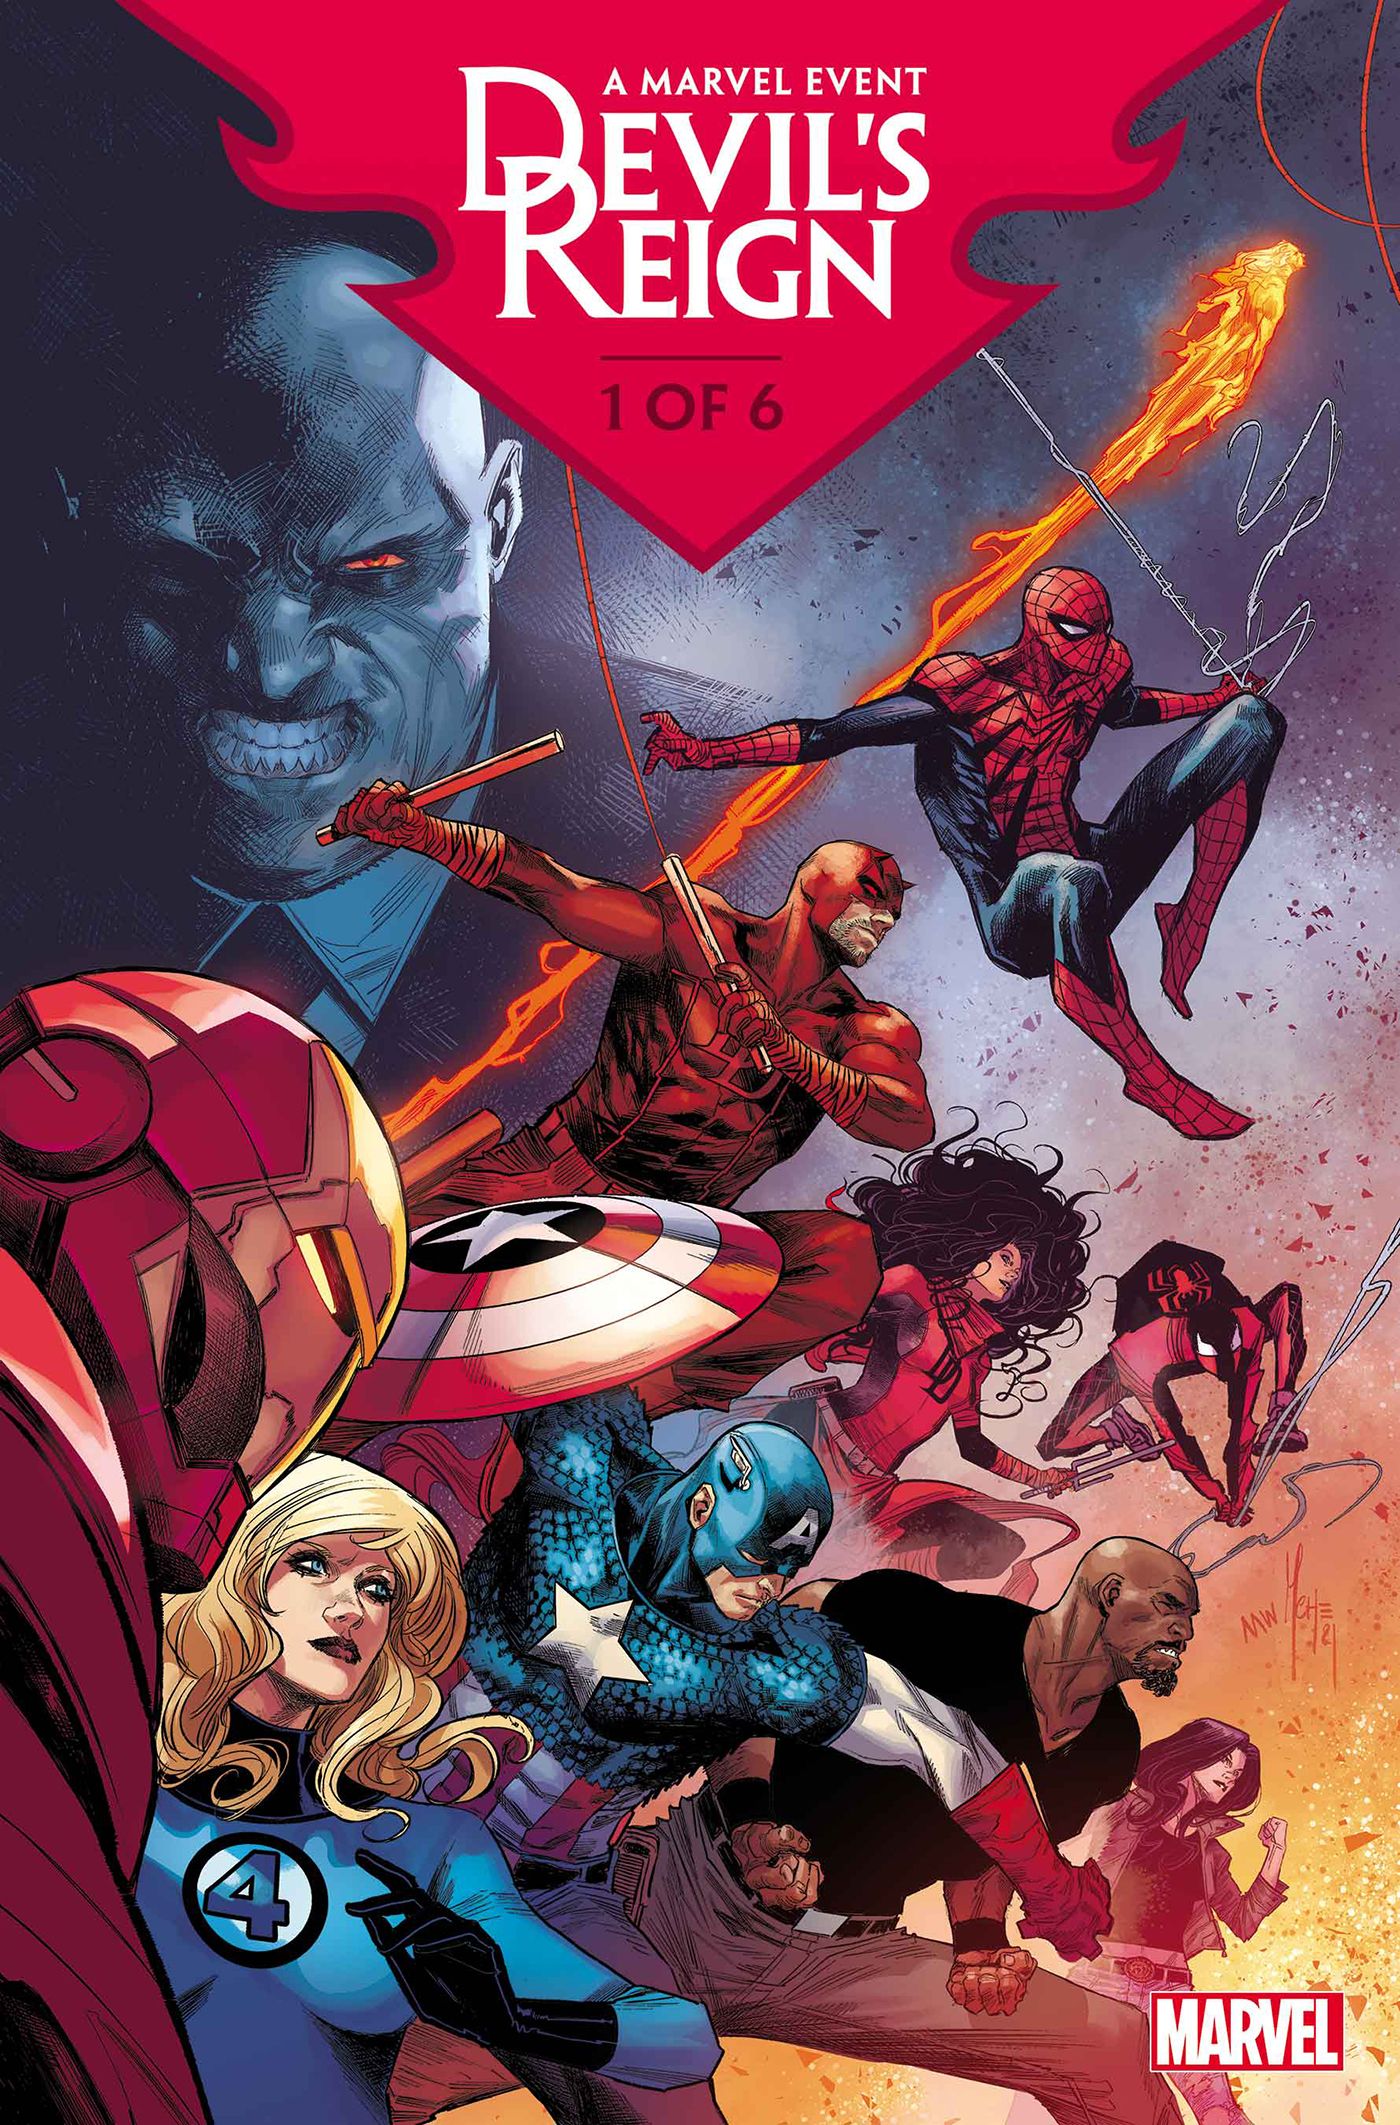 The cover to Devil's Reign #1 shows Kingpin looming over Marvel's heroes.